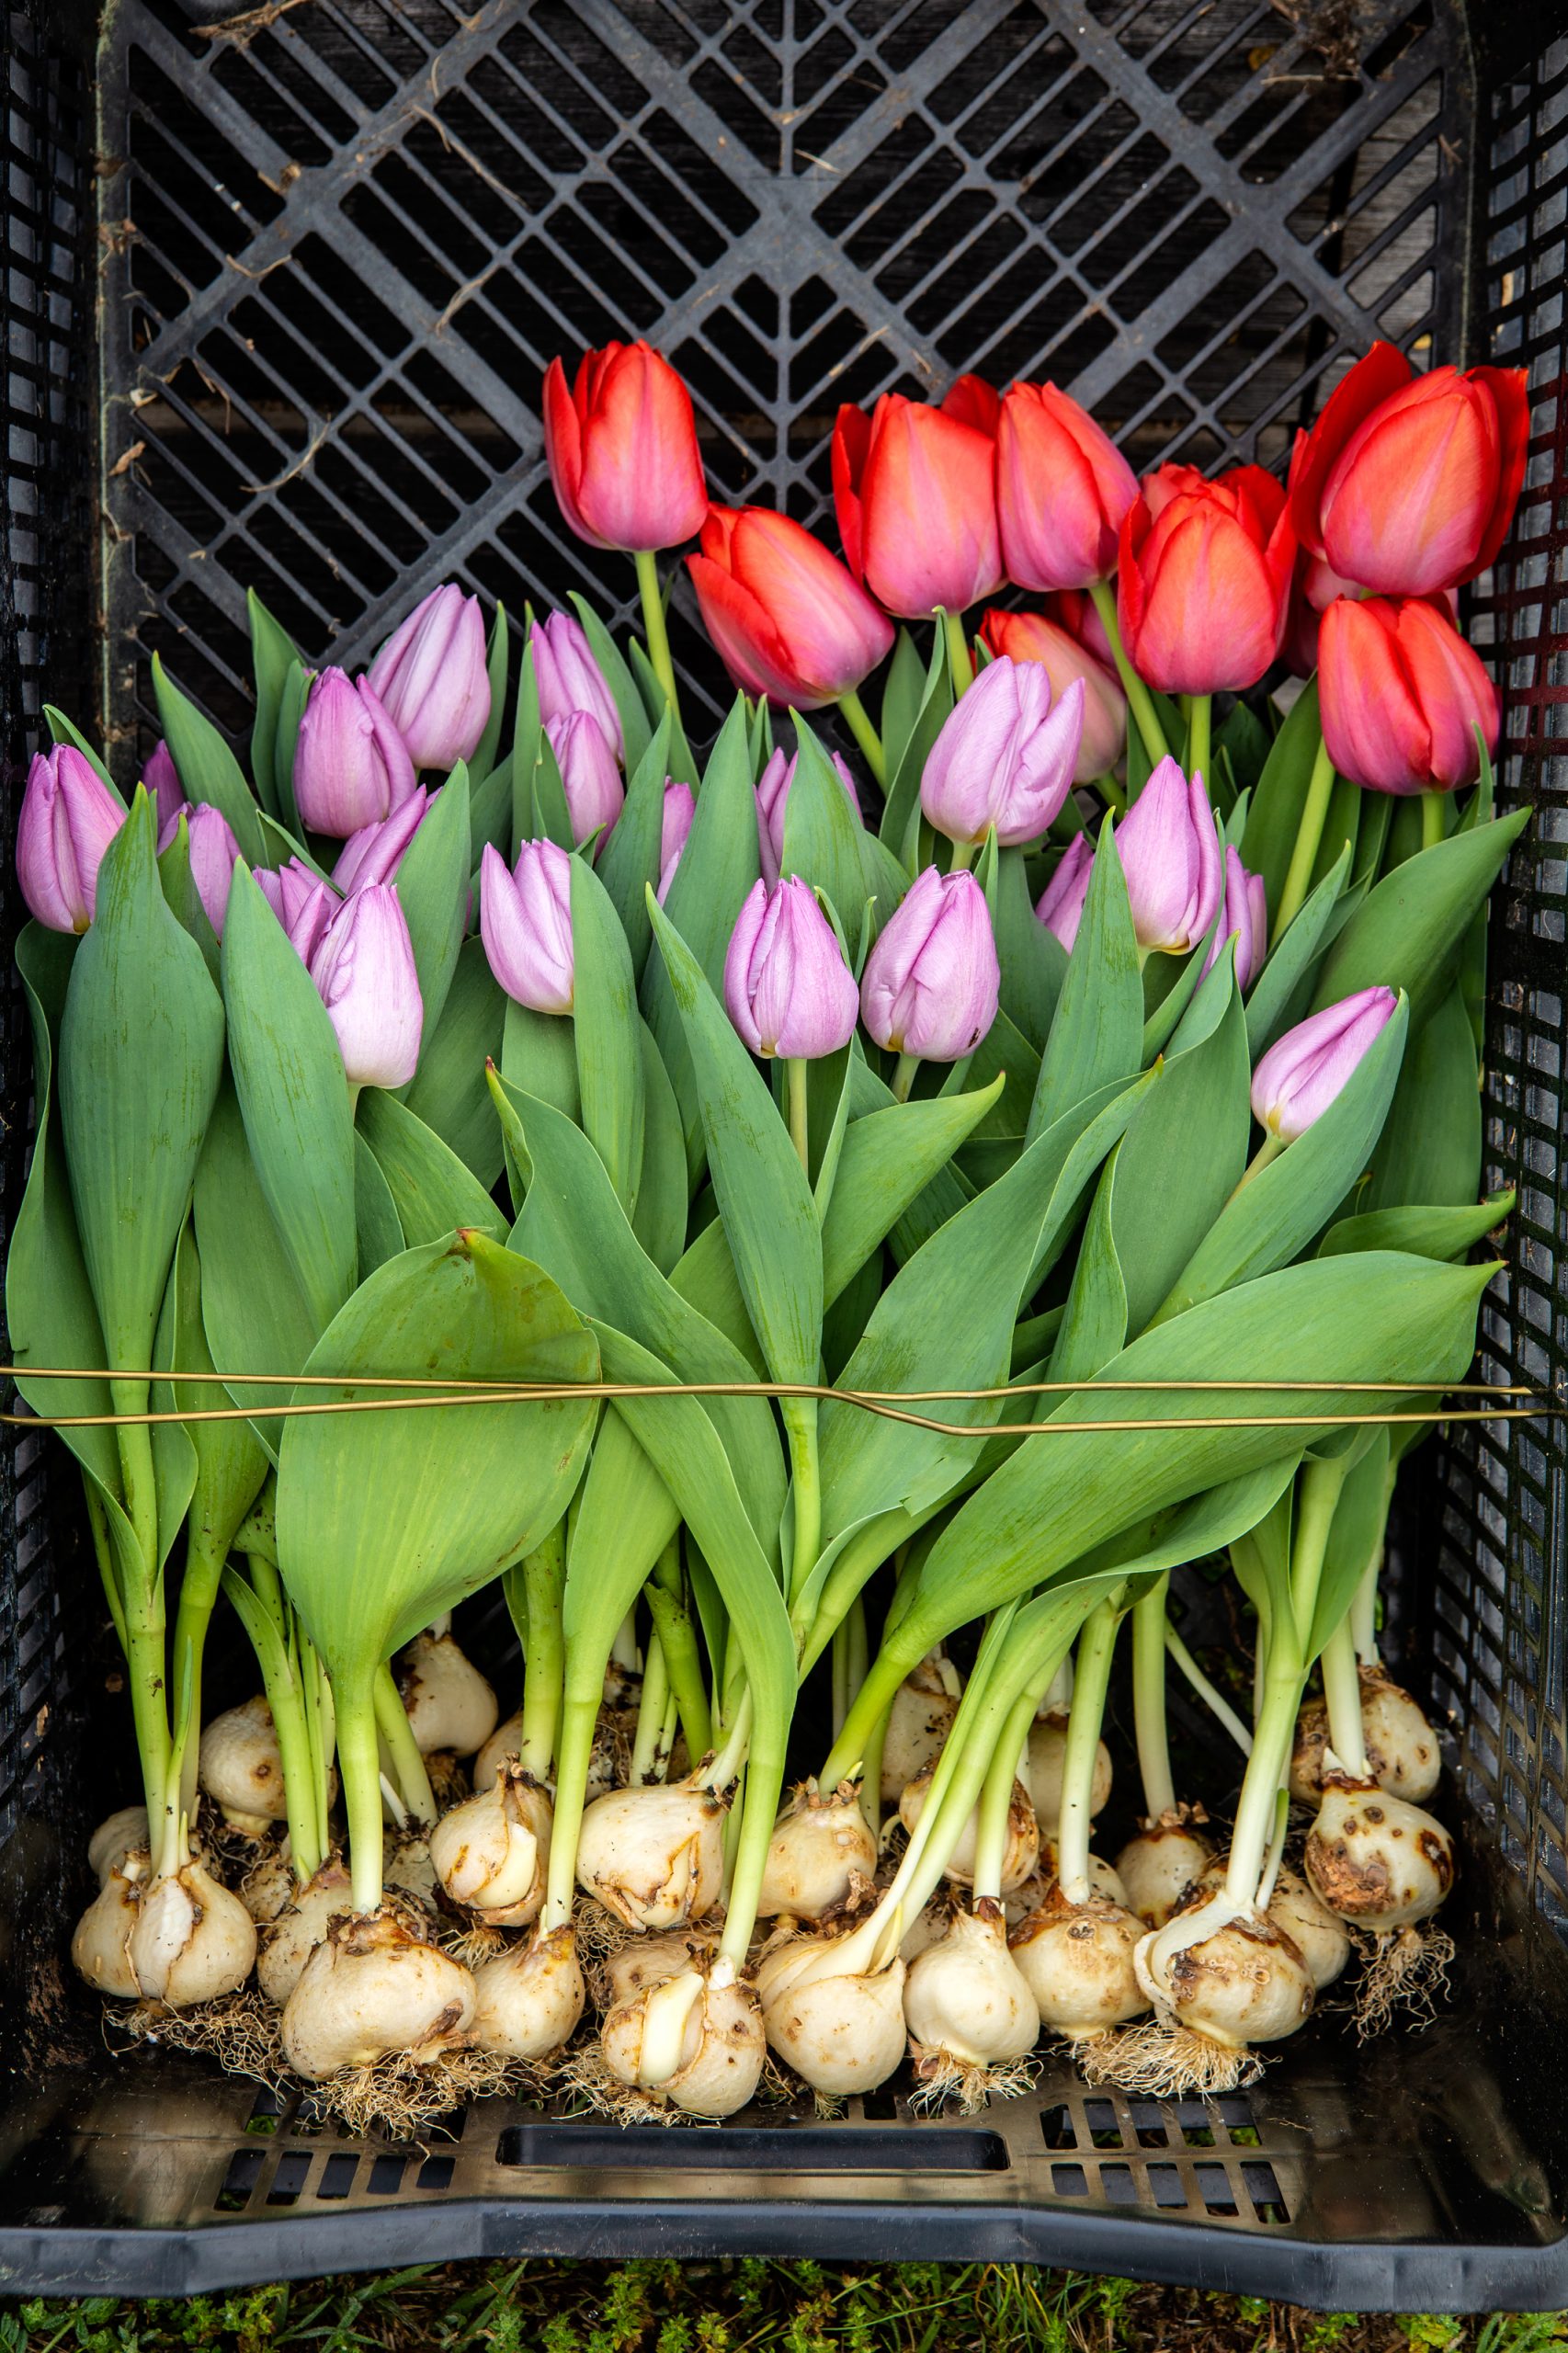 Purple Tuteur offers bulbs and bouquets for purchase on an as-needed basis. Any bulbs that Linda purchases come from Holland and Israel and are then grown on her farm and remain untreated. 